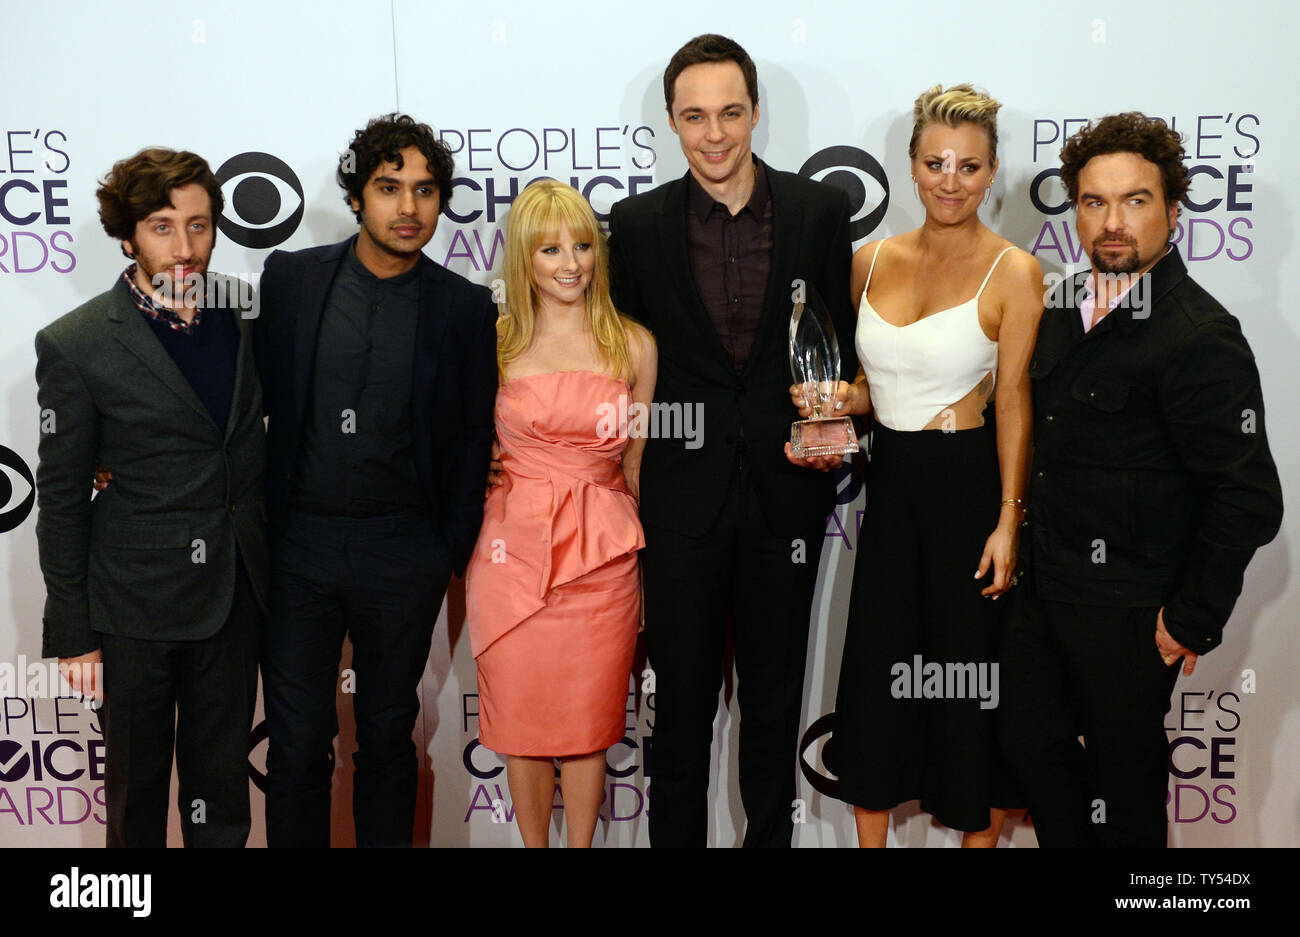 Cast members in the television comedy series "The Big Bang Theory" Simon  Helberg, Kunal Nayyar, Melissa Rauch, Jim Parsons, Kaley Cuoco-Sweeting and  Johnny Galecki (l-R) appear backstage with the award for favorite